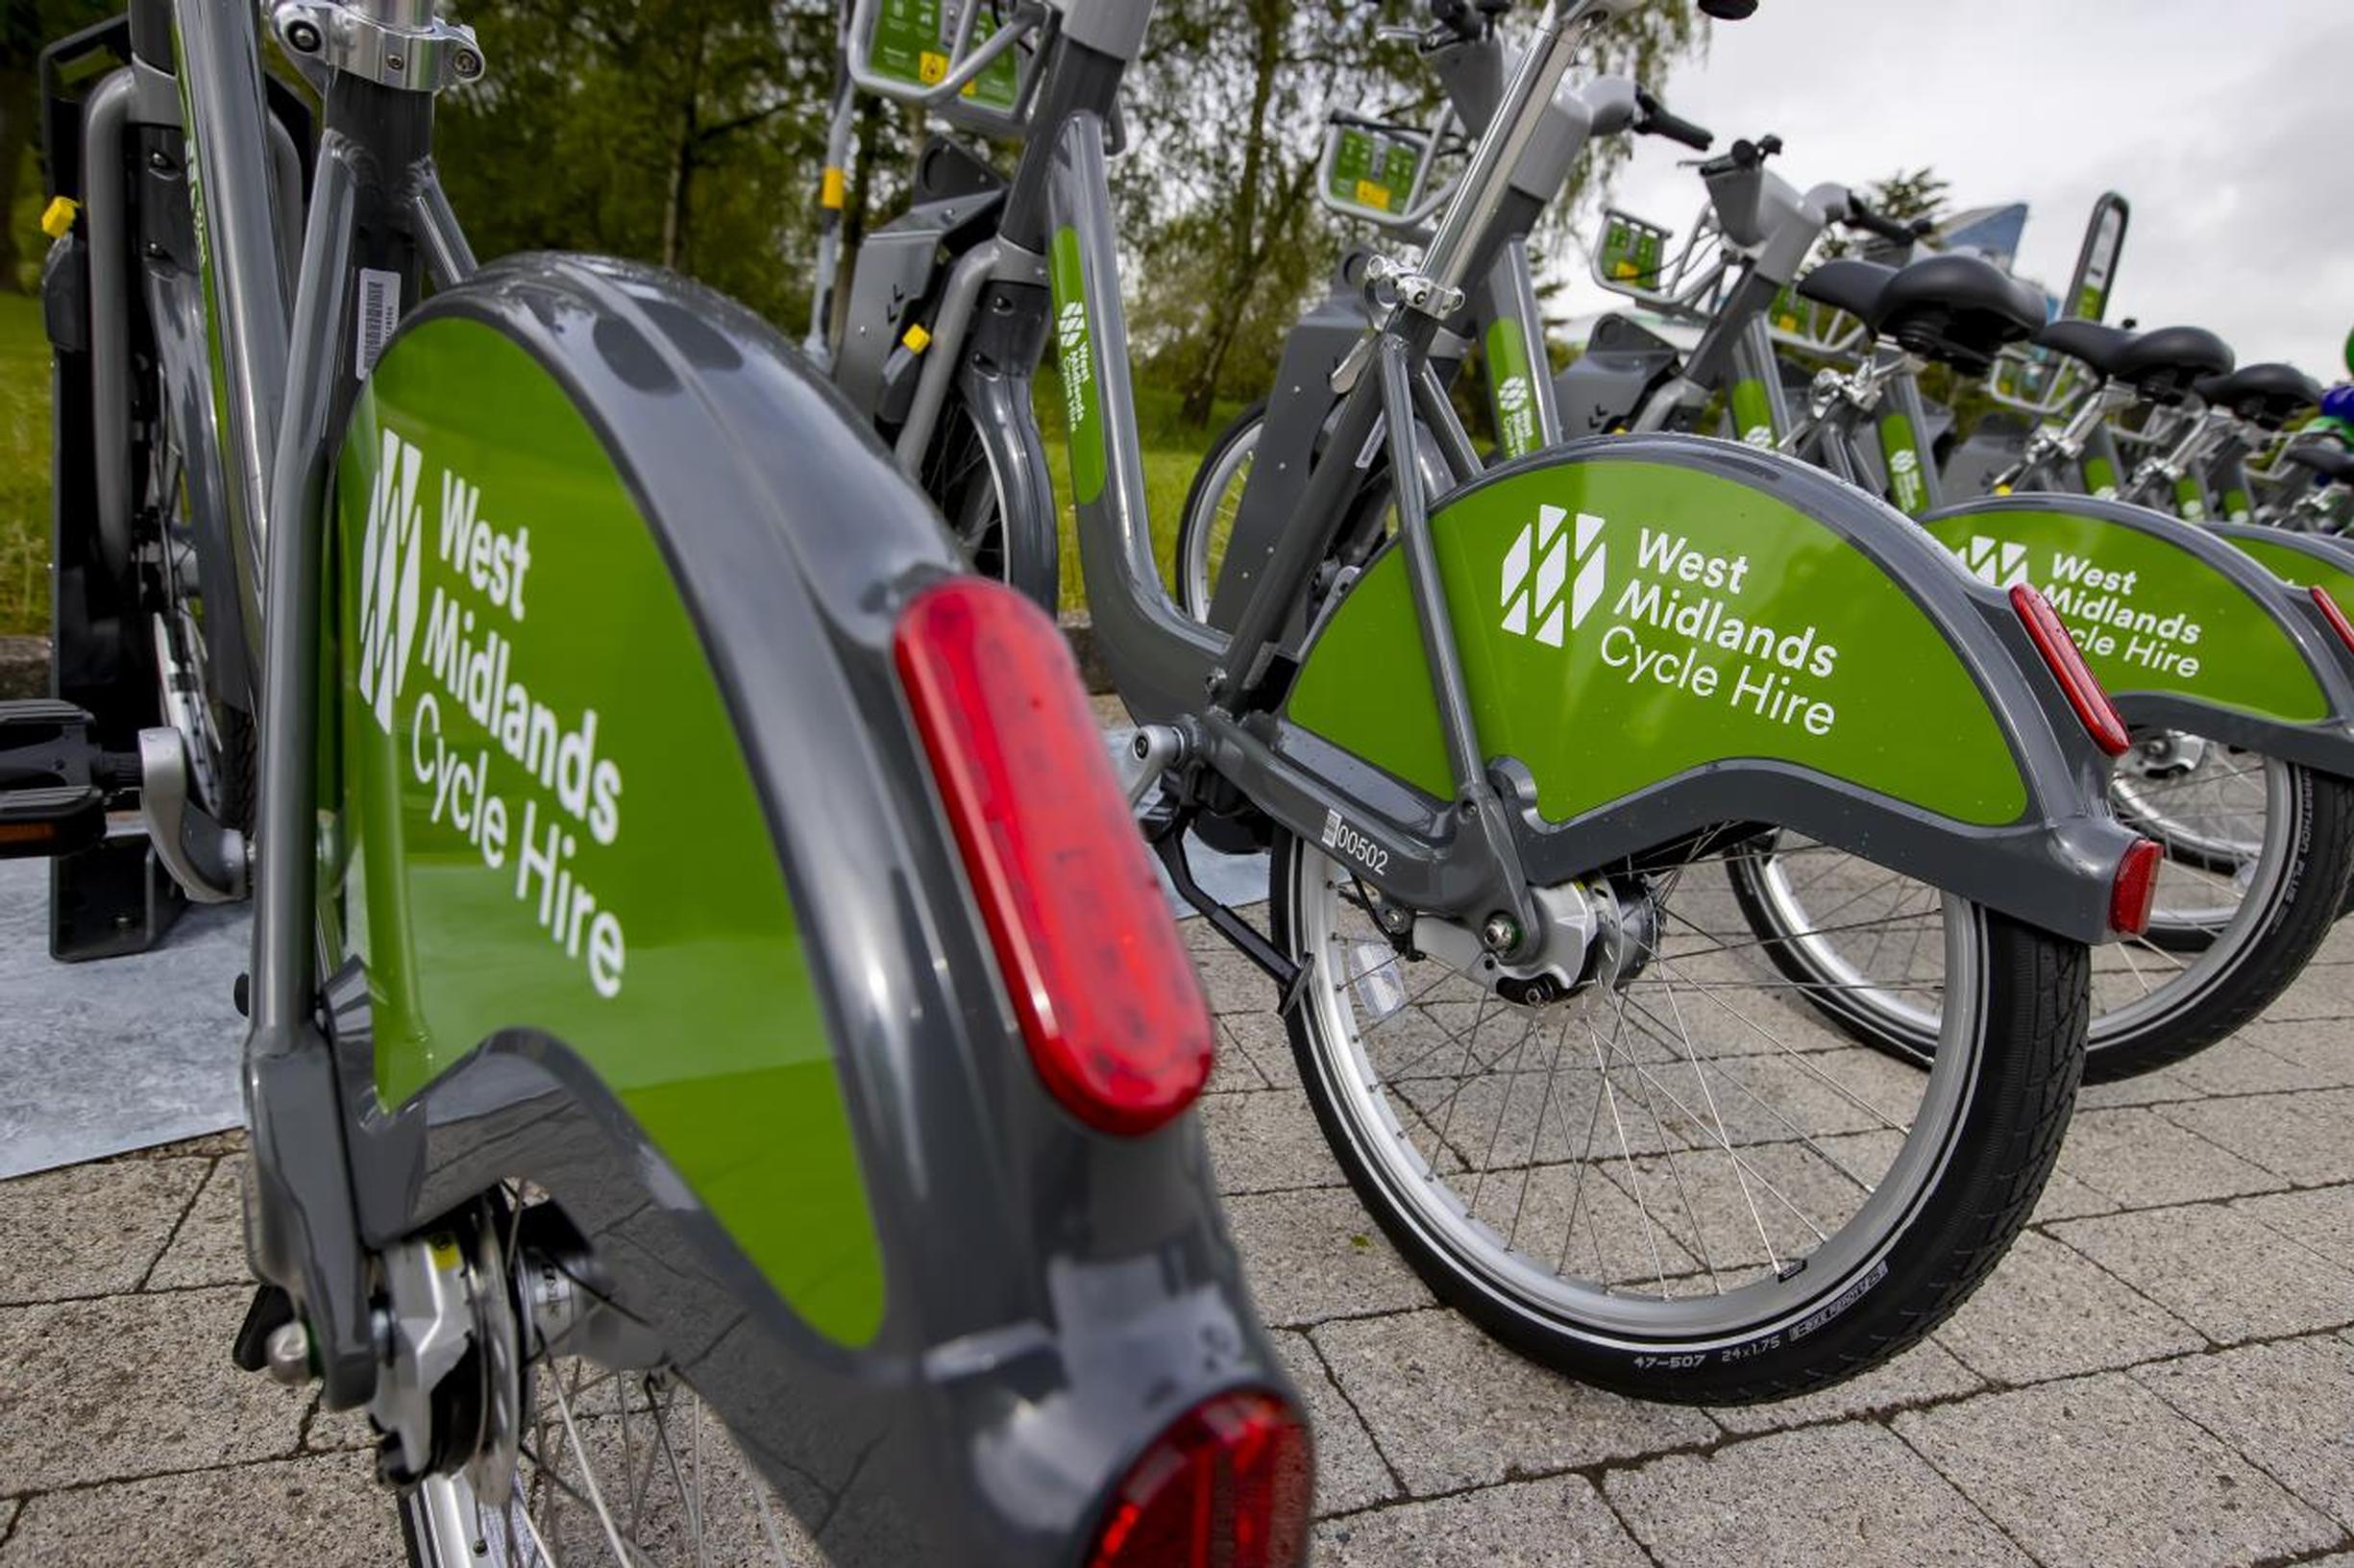 The West Midlands cycle hire scheme is to include e-bikes